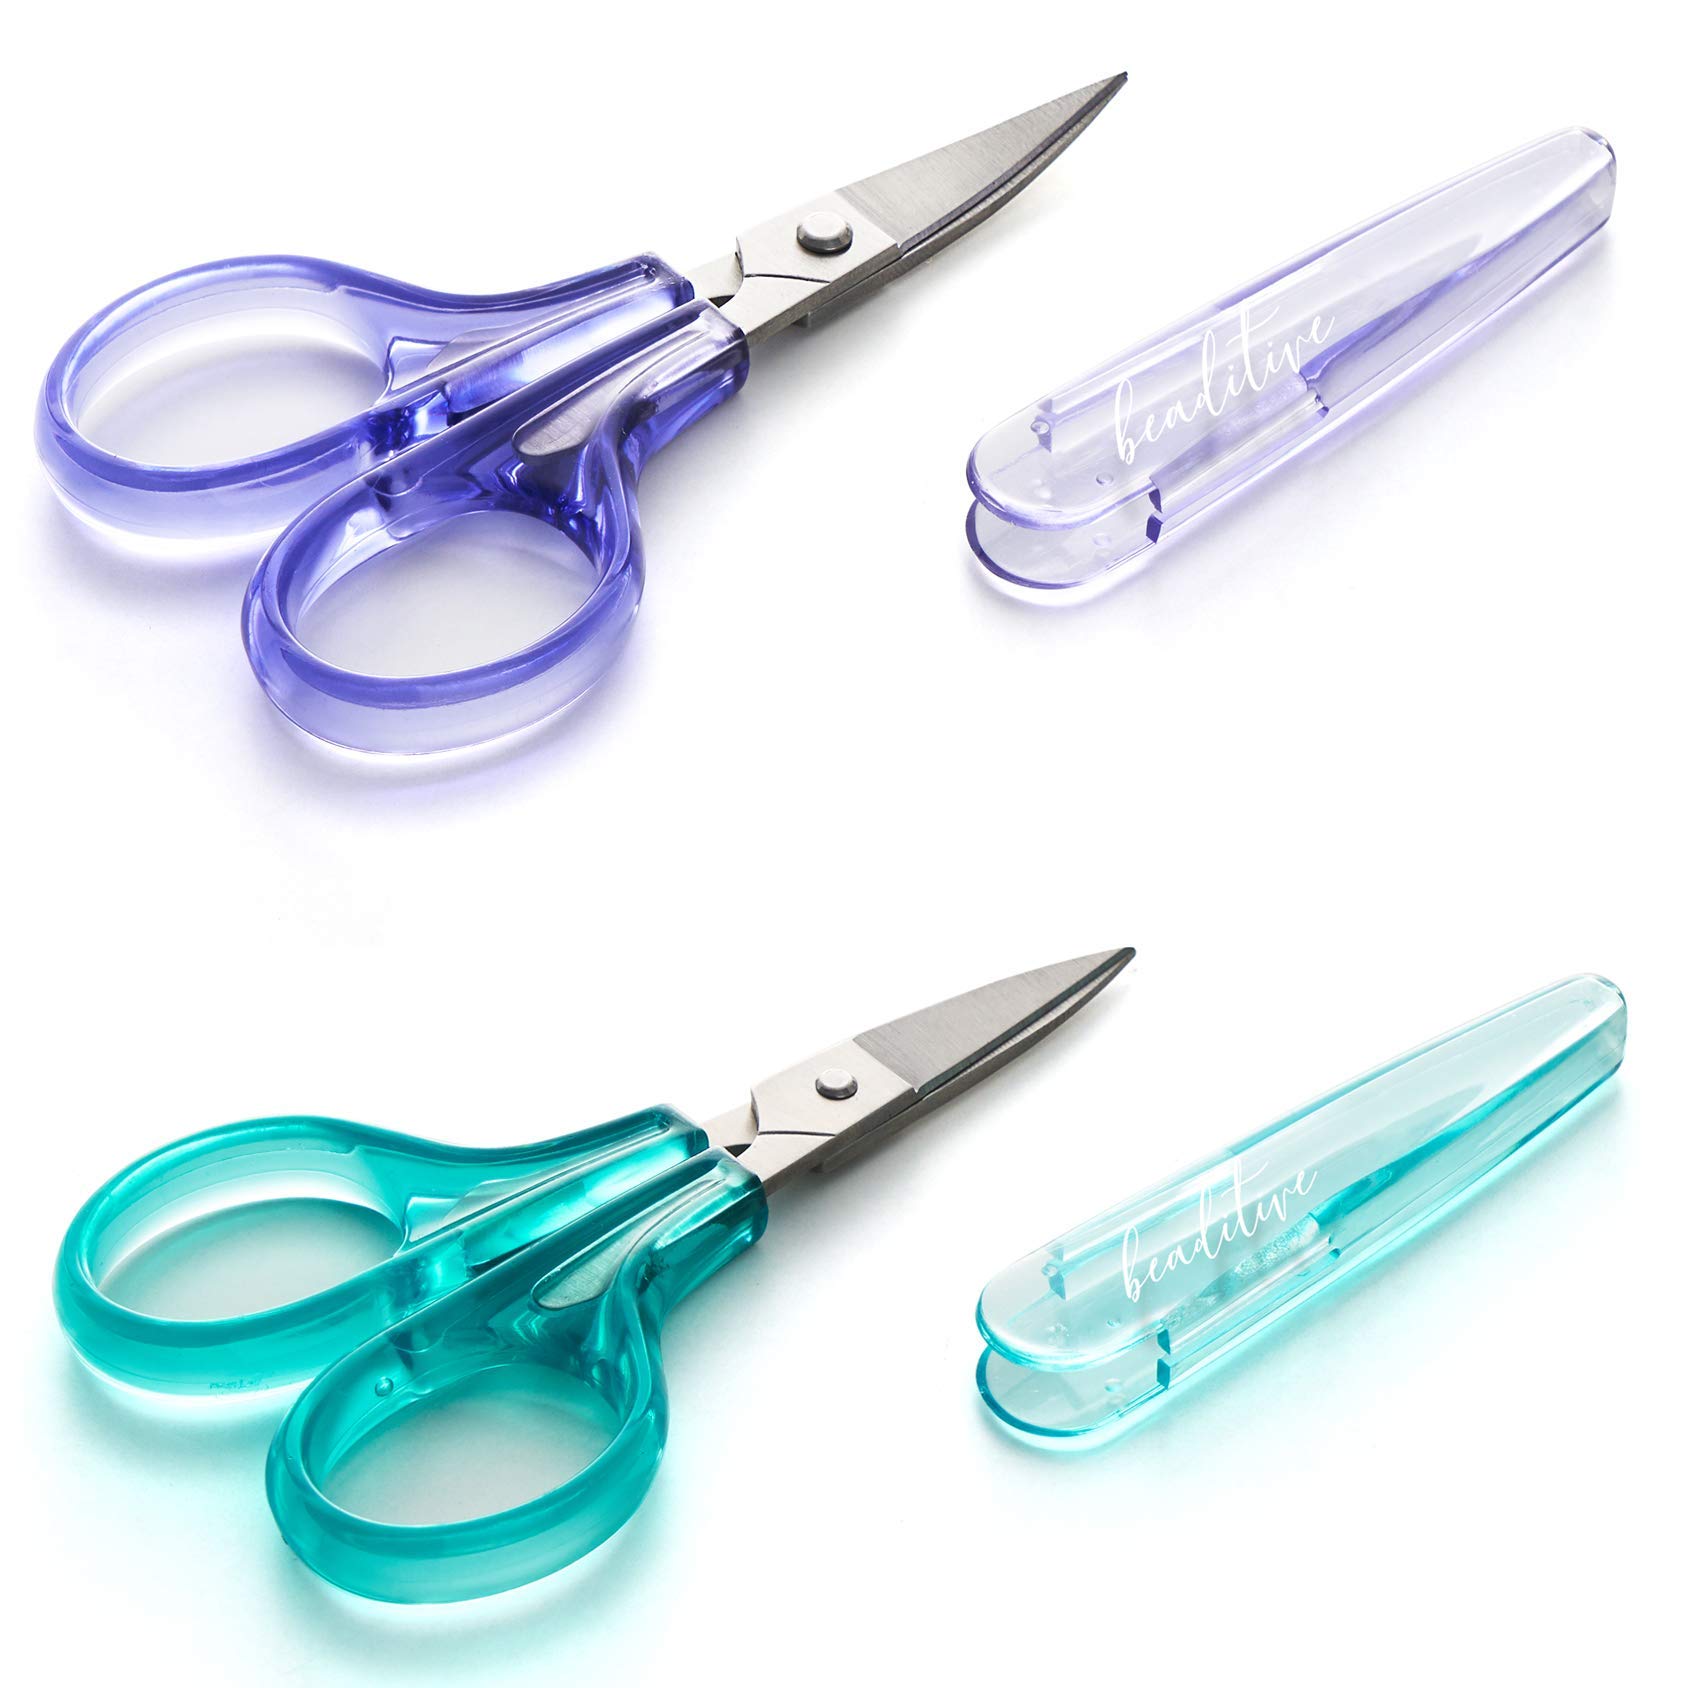 S-709 Beaditive Detail Craft Scissors Set (2 Pc.) Curved and Straight,  Sharp, Compact Sewing, Embroidery, Paper Cutting, Crafting St